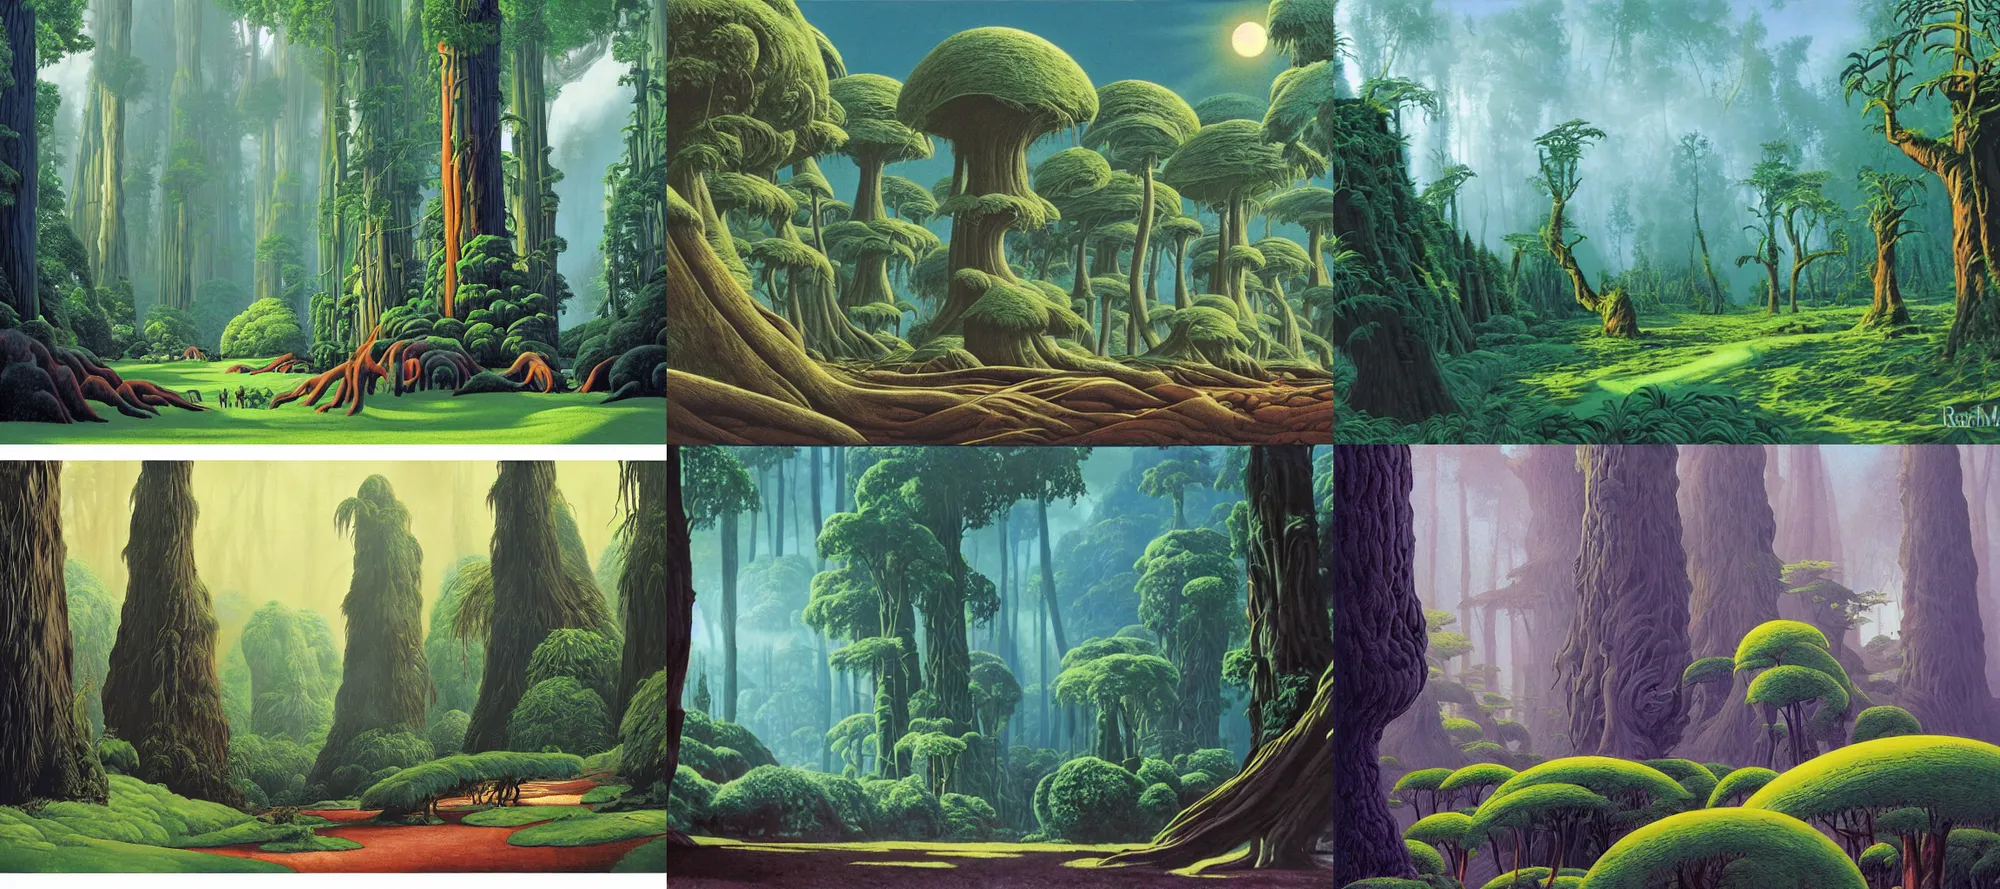 Prompt: A Kashyyyk landscape in the style of Dr. Seuss, starships, giant trees, dense forest, painting by Ralph McQuarrie